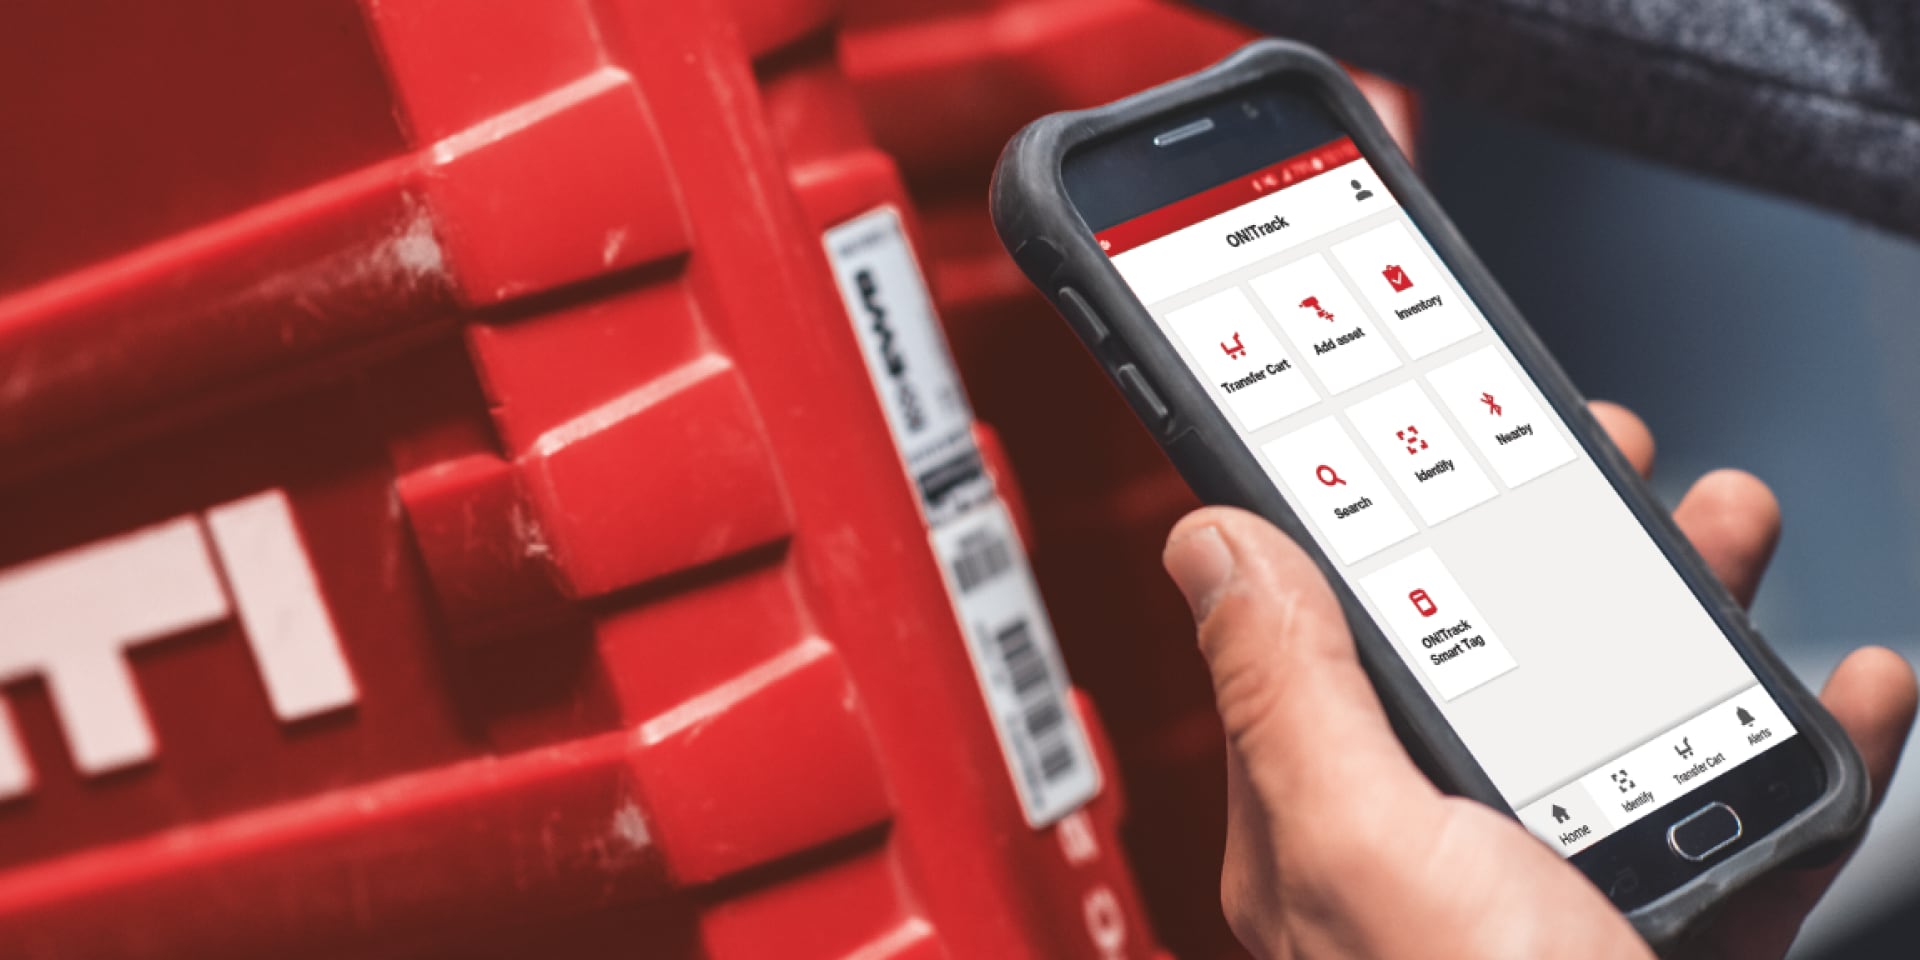 Hilti ON!TRACK 3 App brings hassle-free tool services to your fingertips